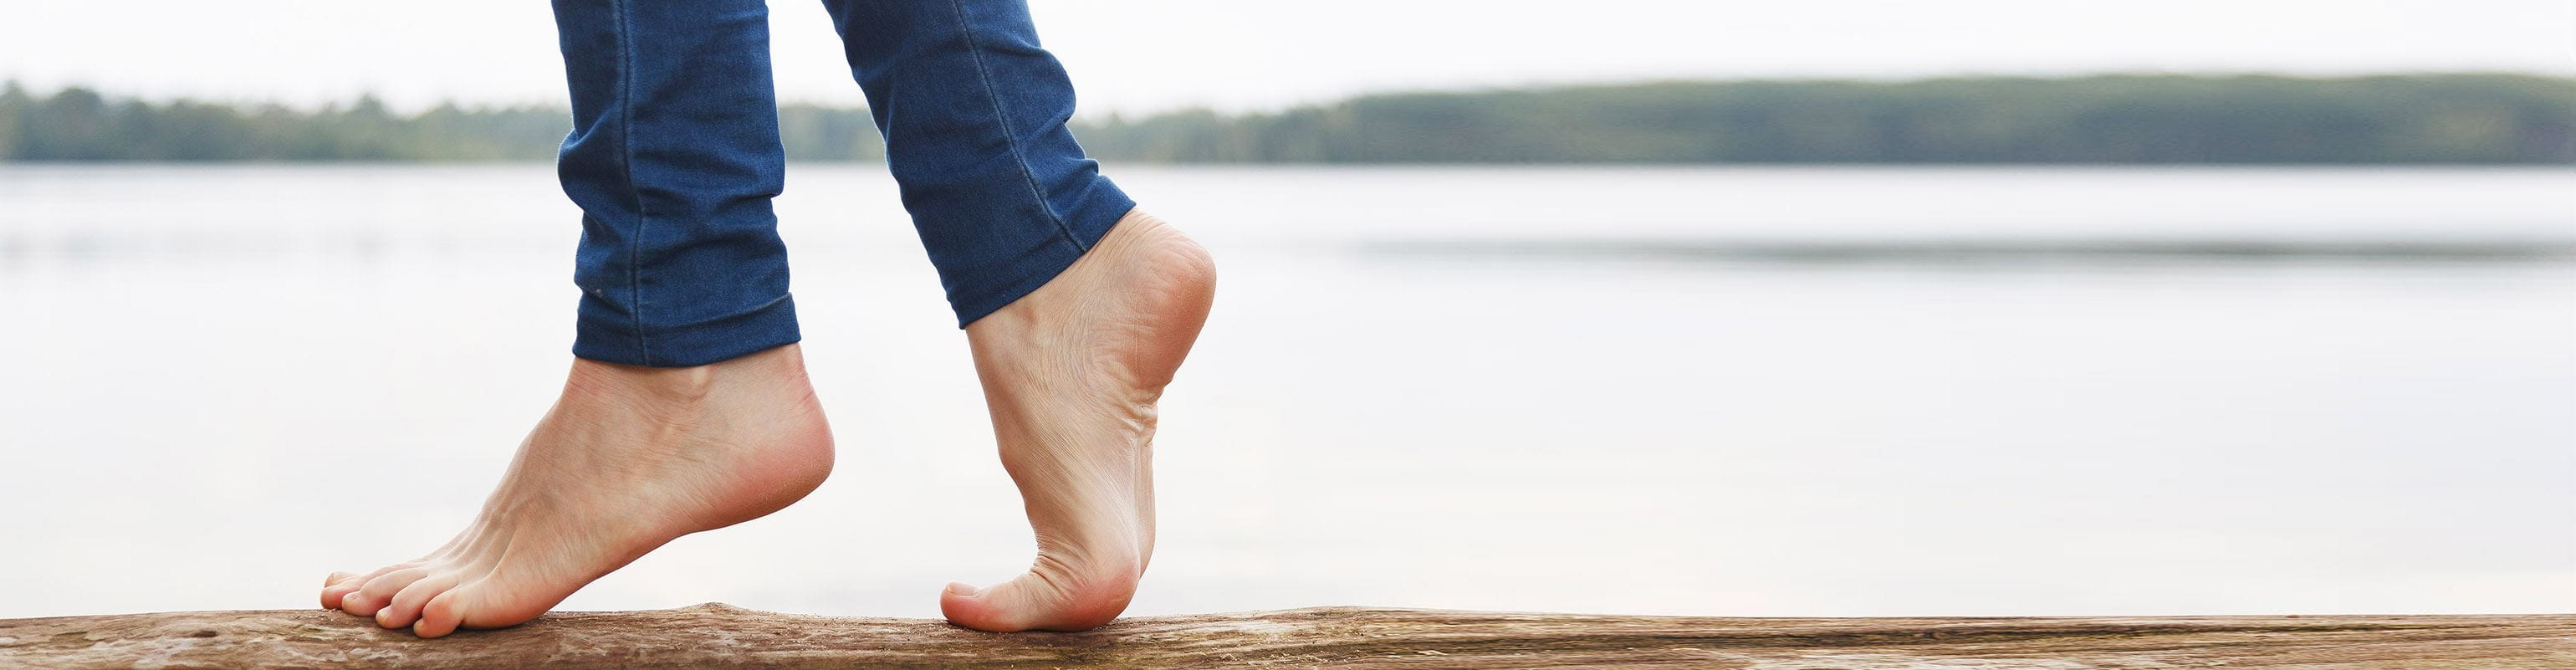 Why Do Cracked Heels Develop?